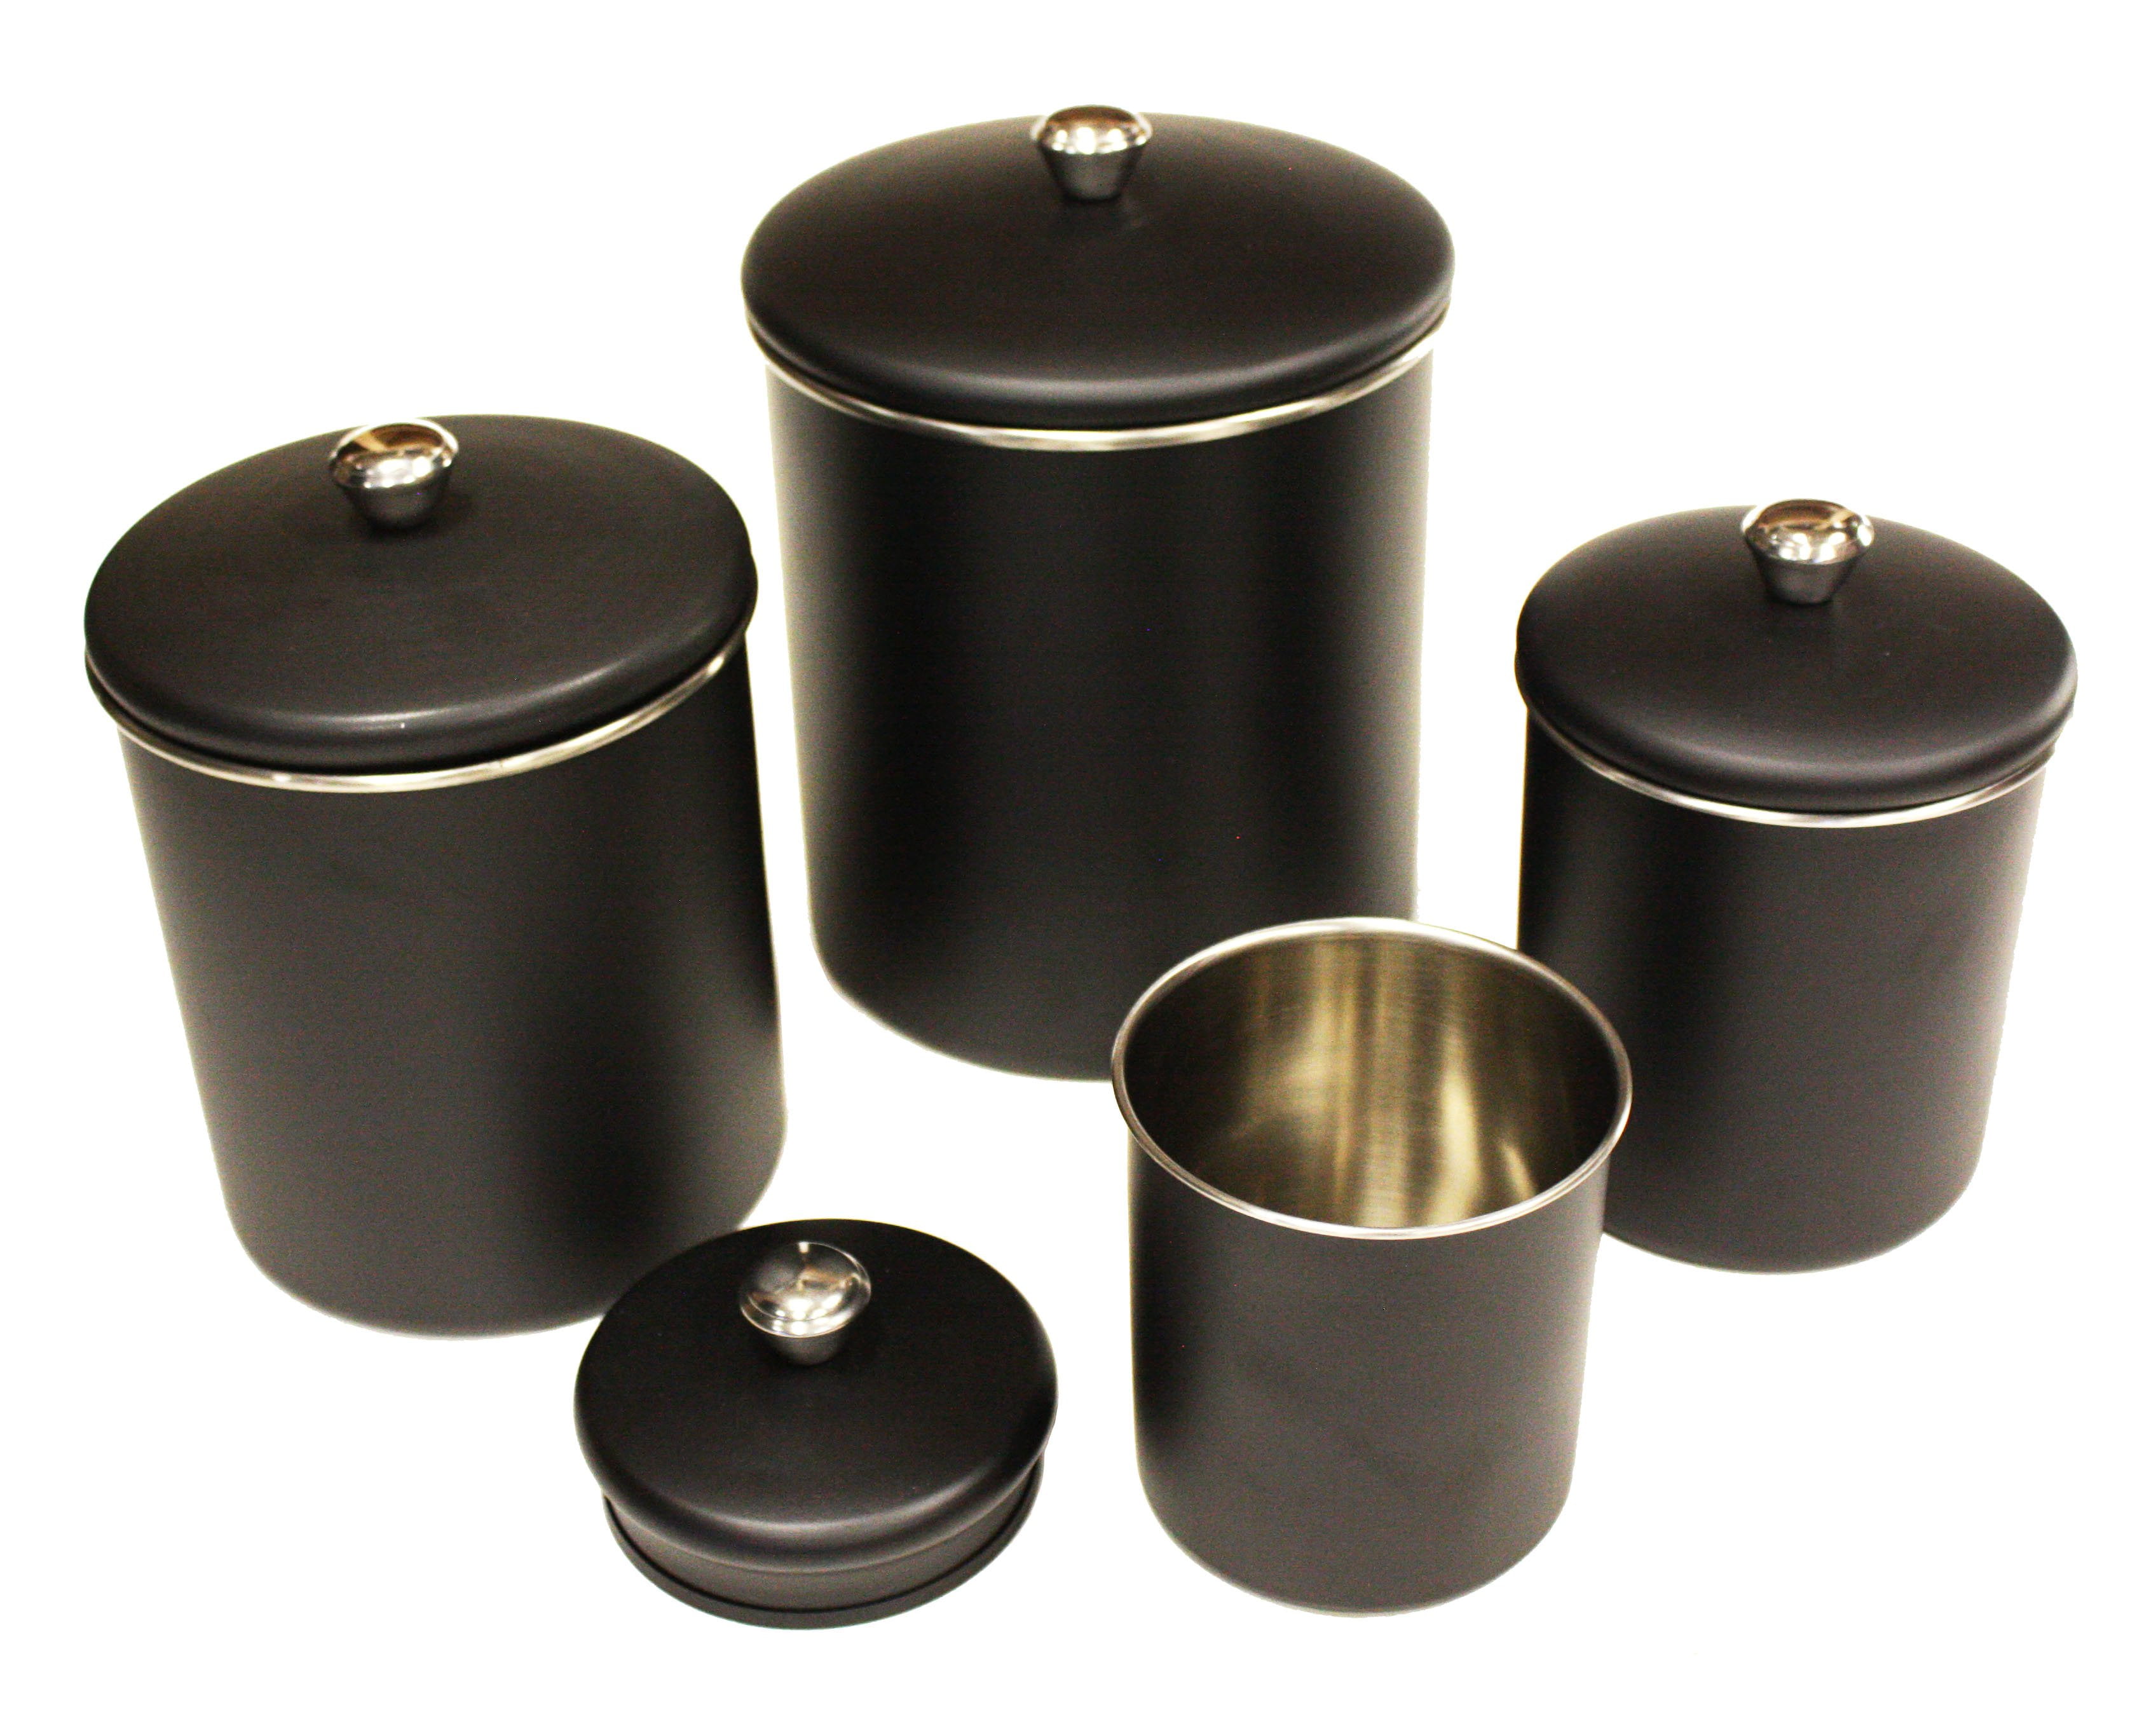 Black Stainless Steel Canister Set